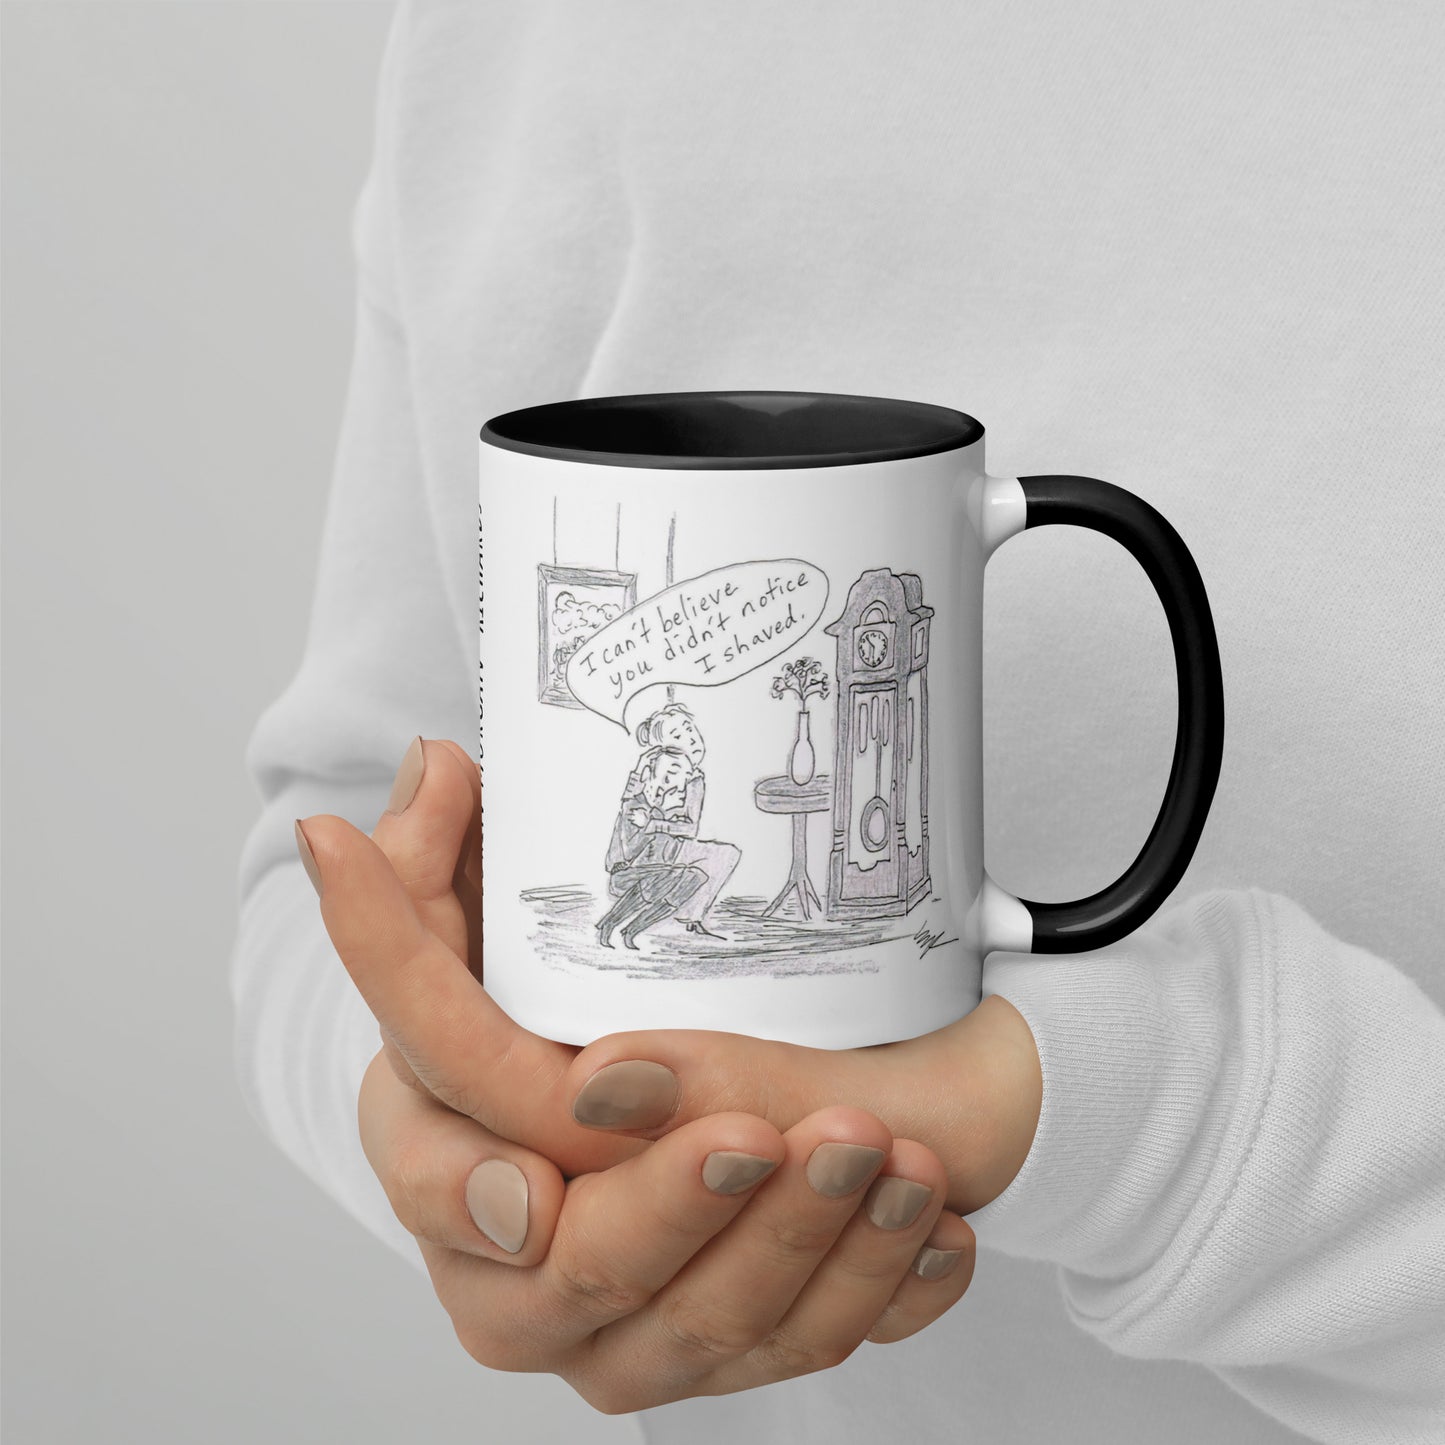 The Goodbye Family Mug More Funnies with Black color inside